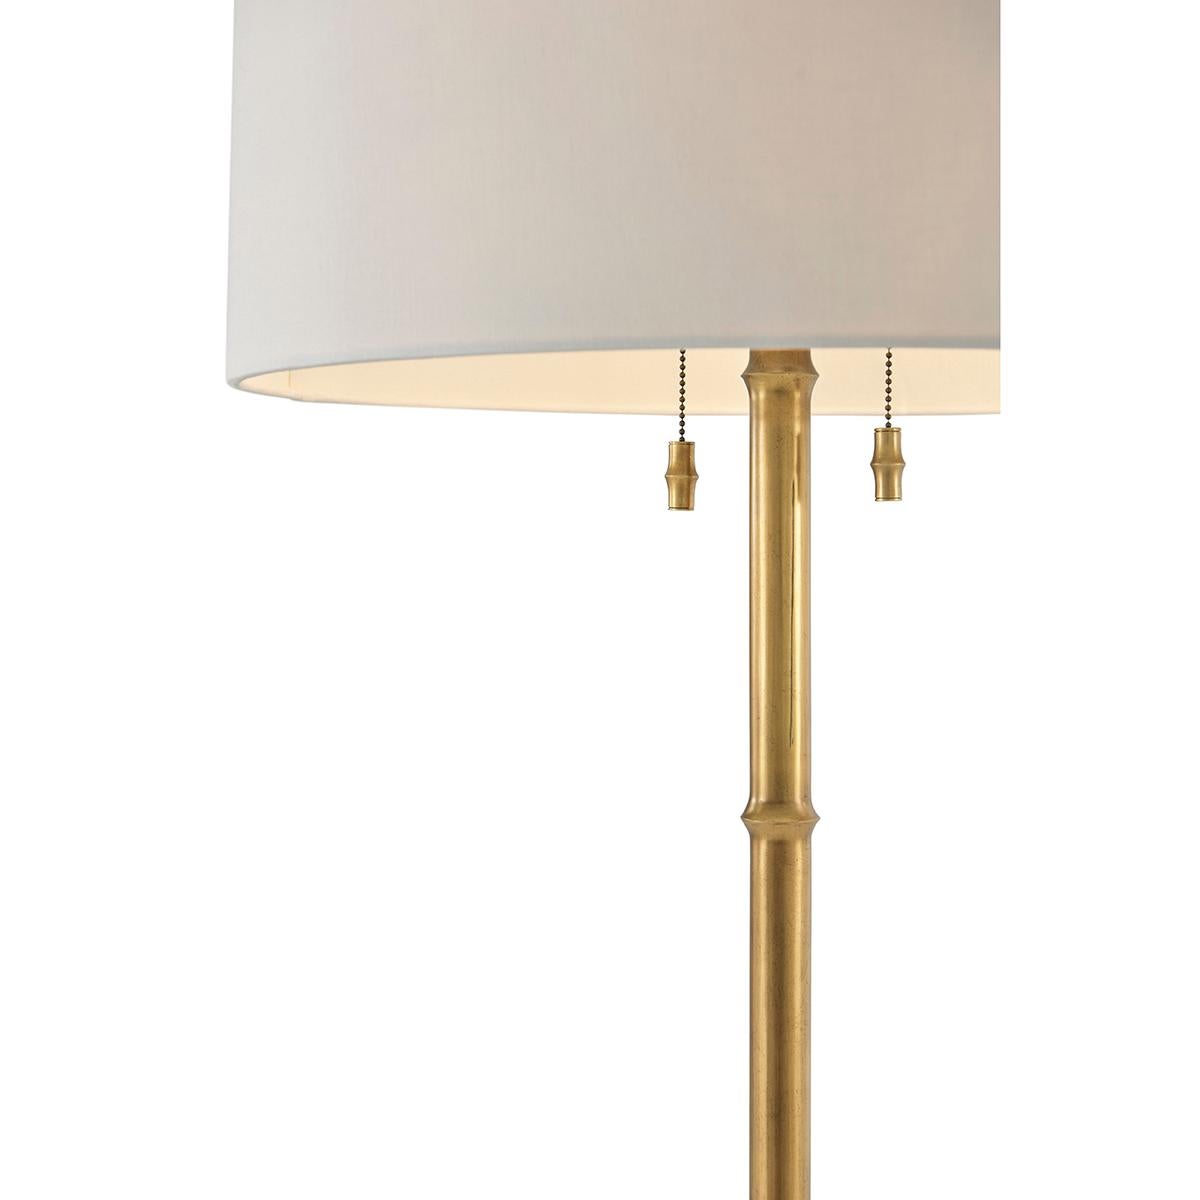 A mid-century chinoiserie-inspired floor lamp, with a round linen shade on a satin brass-finished faux bamboo pedestal and a disc base.

Dimensions: 23